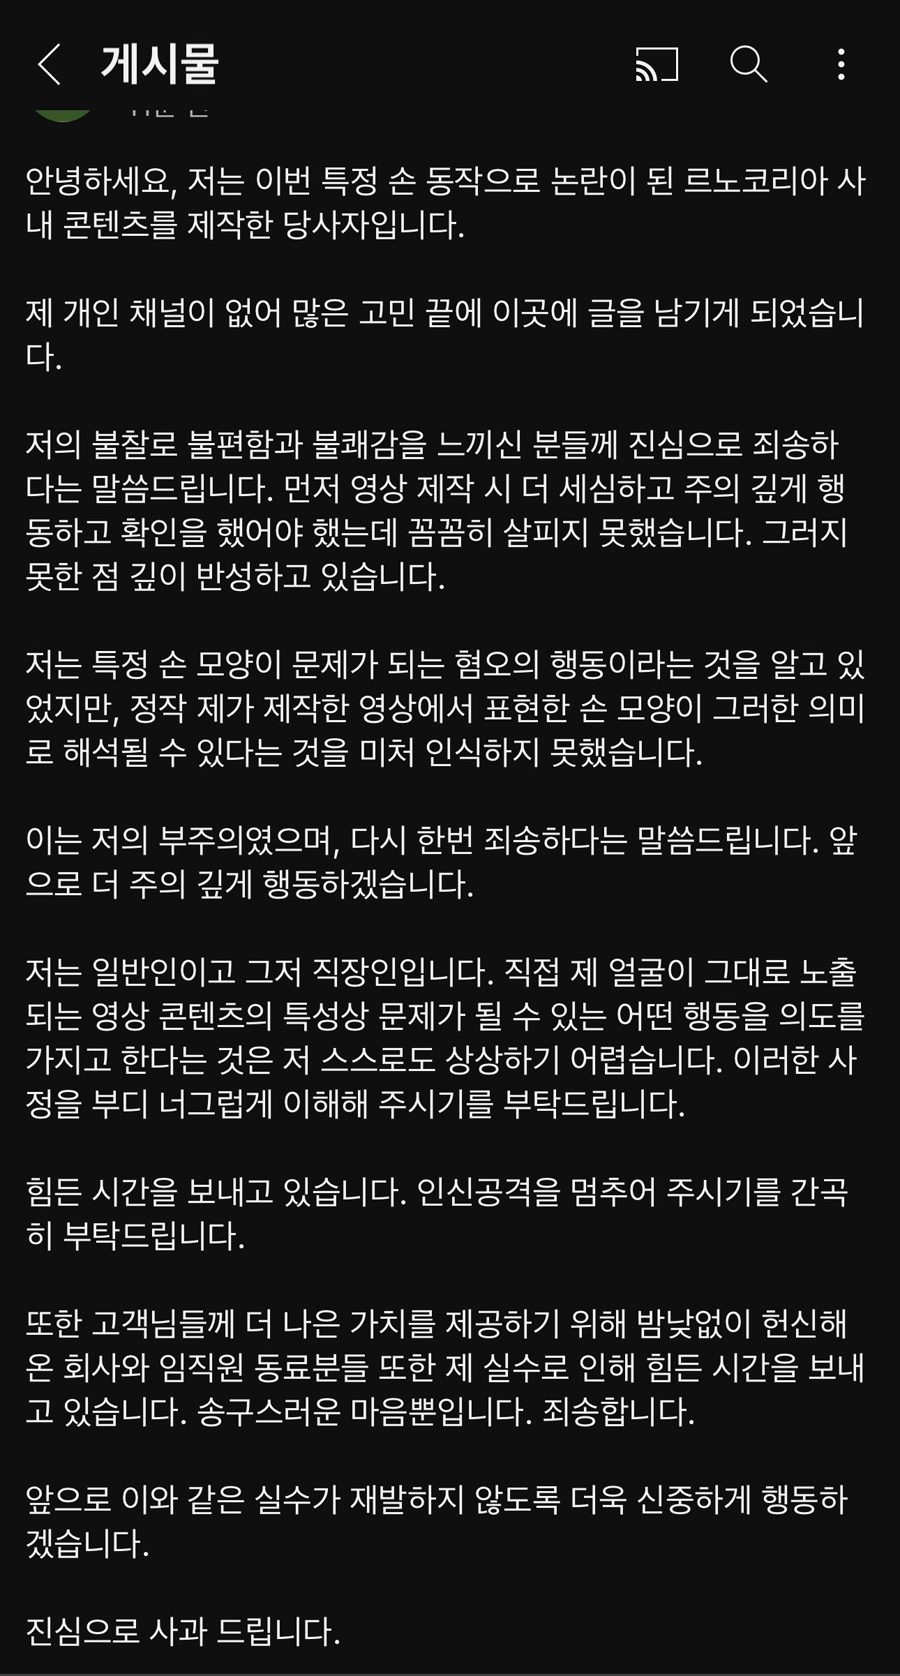 Apology from Renault Korea video producer